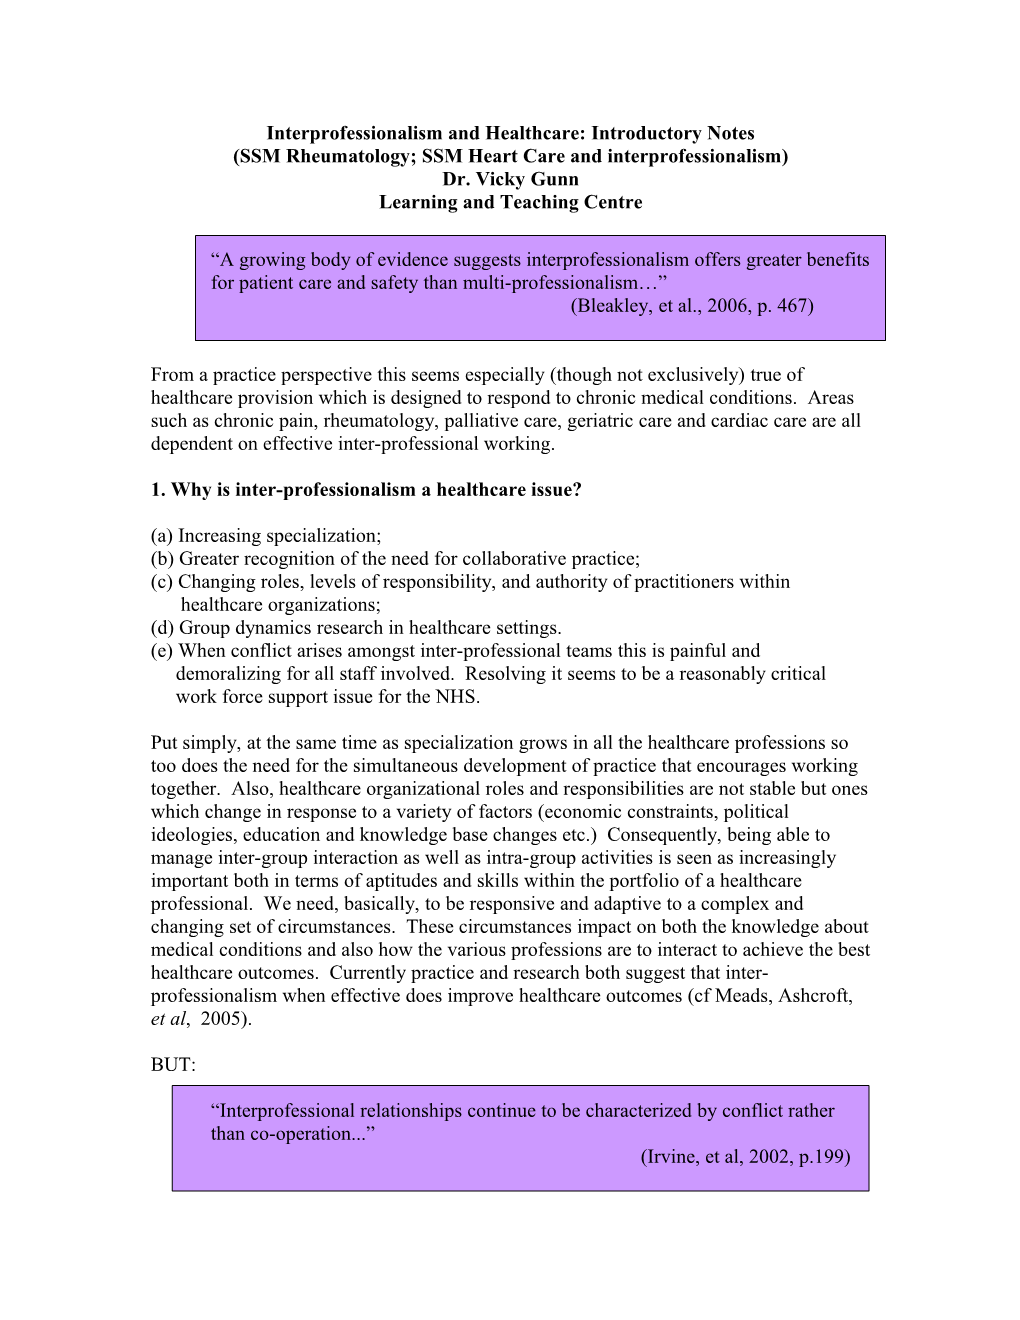 Interprofessionalism and Healthcare: Introductory Notes